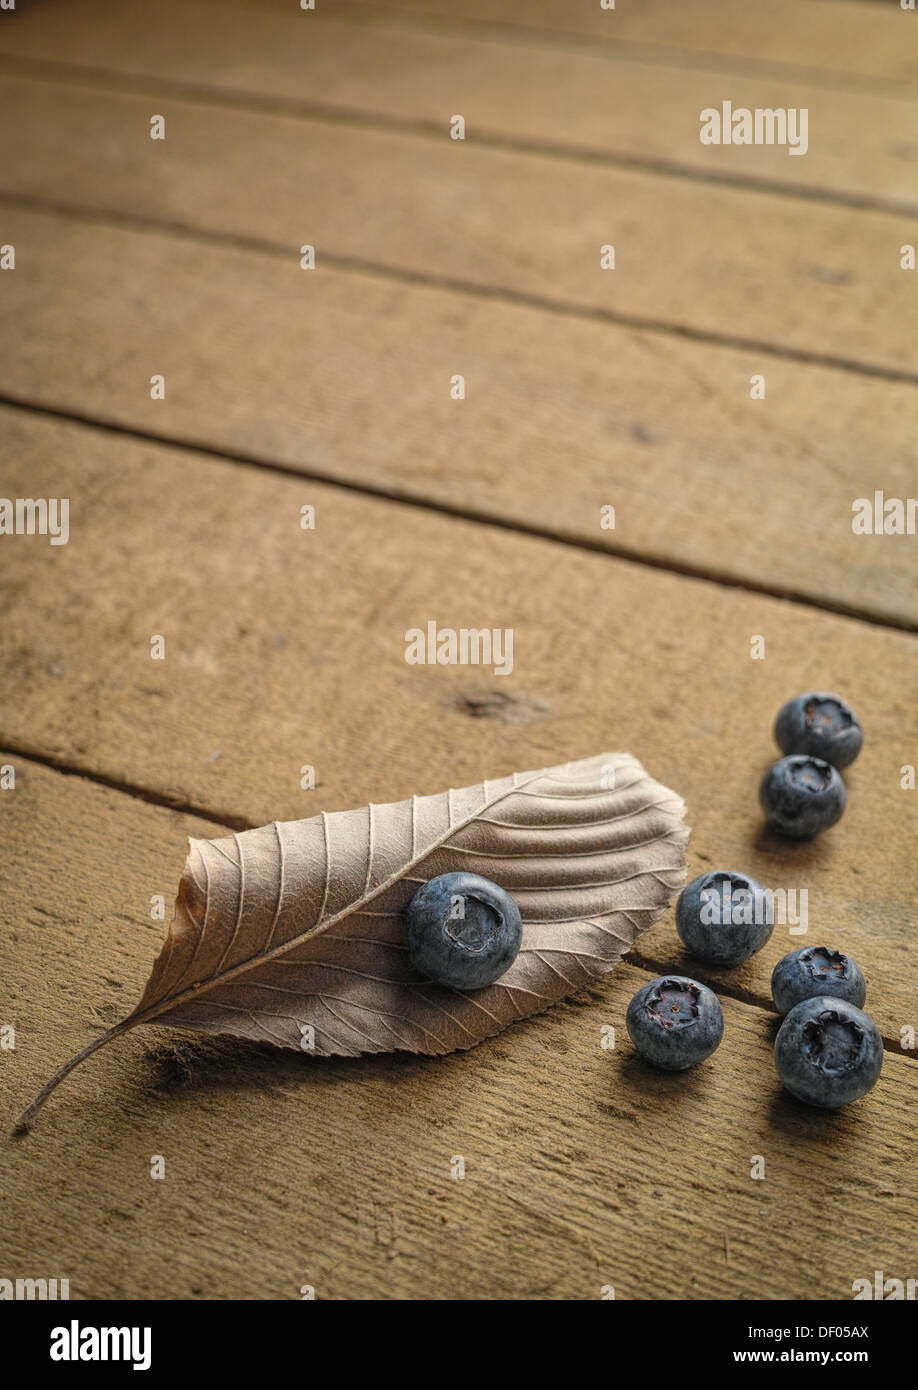 Scattered blueberries with a dried fallen leaf representing the remains of an Autumn/Fall harvest Stock Photo